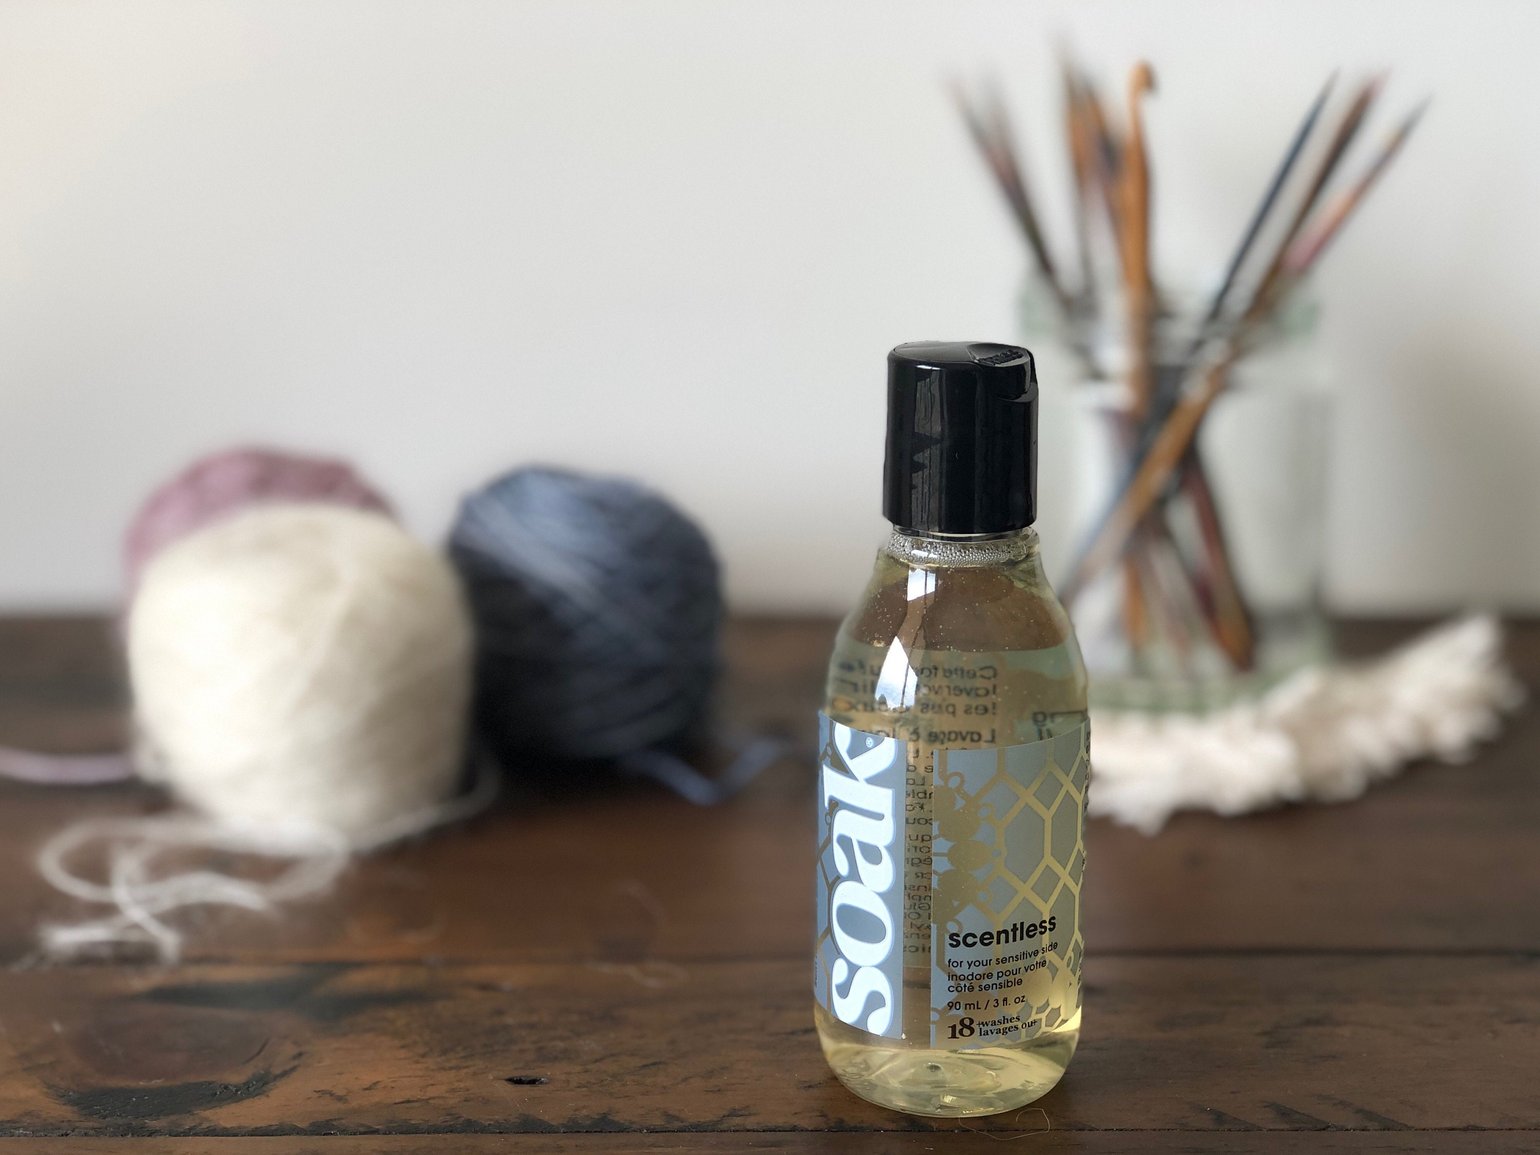 Image of Soak Wash - 3oz/90ml Bottle - Delicate laundry detergent for knits - Scentless